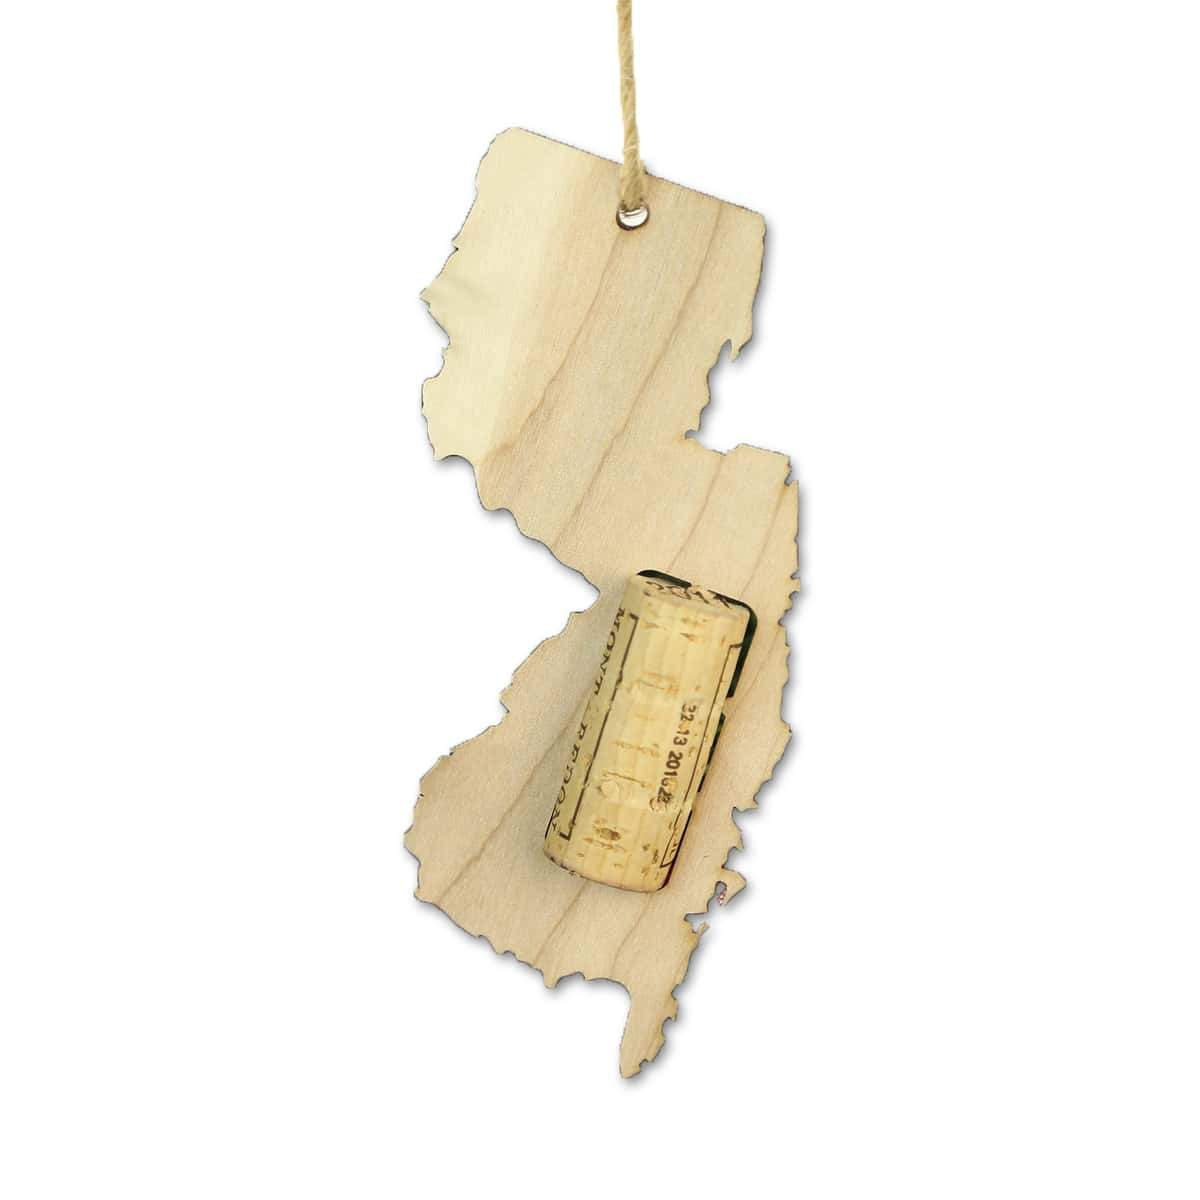 Torched Products Wine Cork Holder New Jersey Wine Cork Holder Ornaments (781203013749)